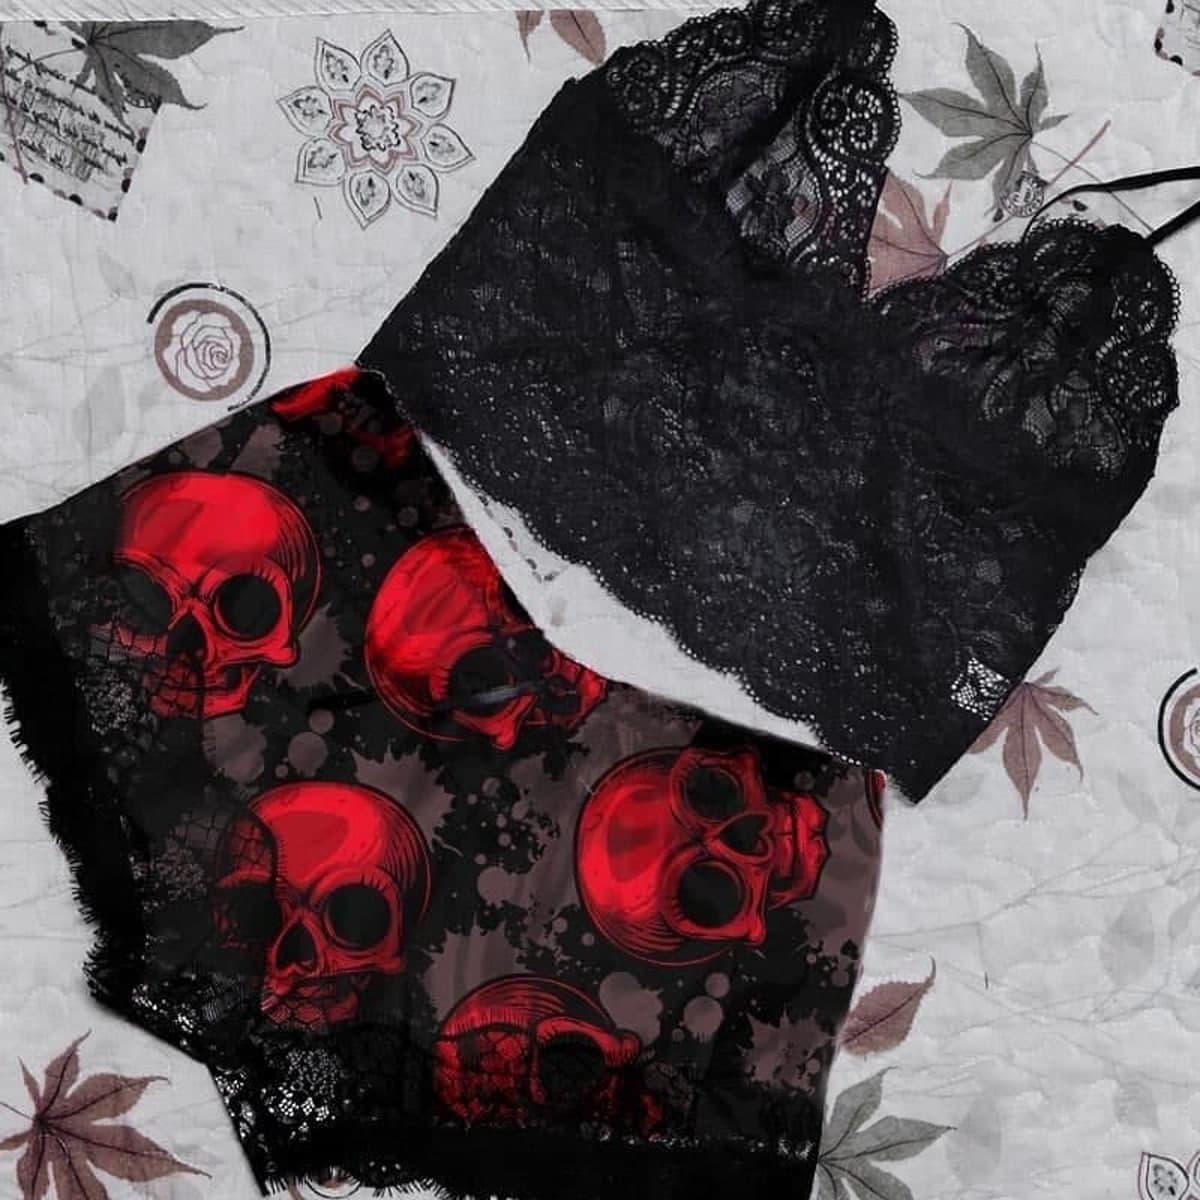 Sexy Black Bra With Red Roses and Skulls / Erotic Female Bra